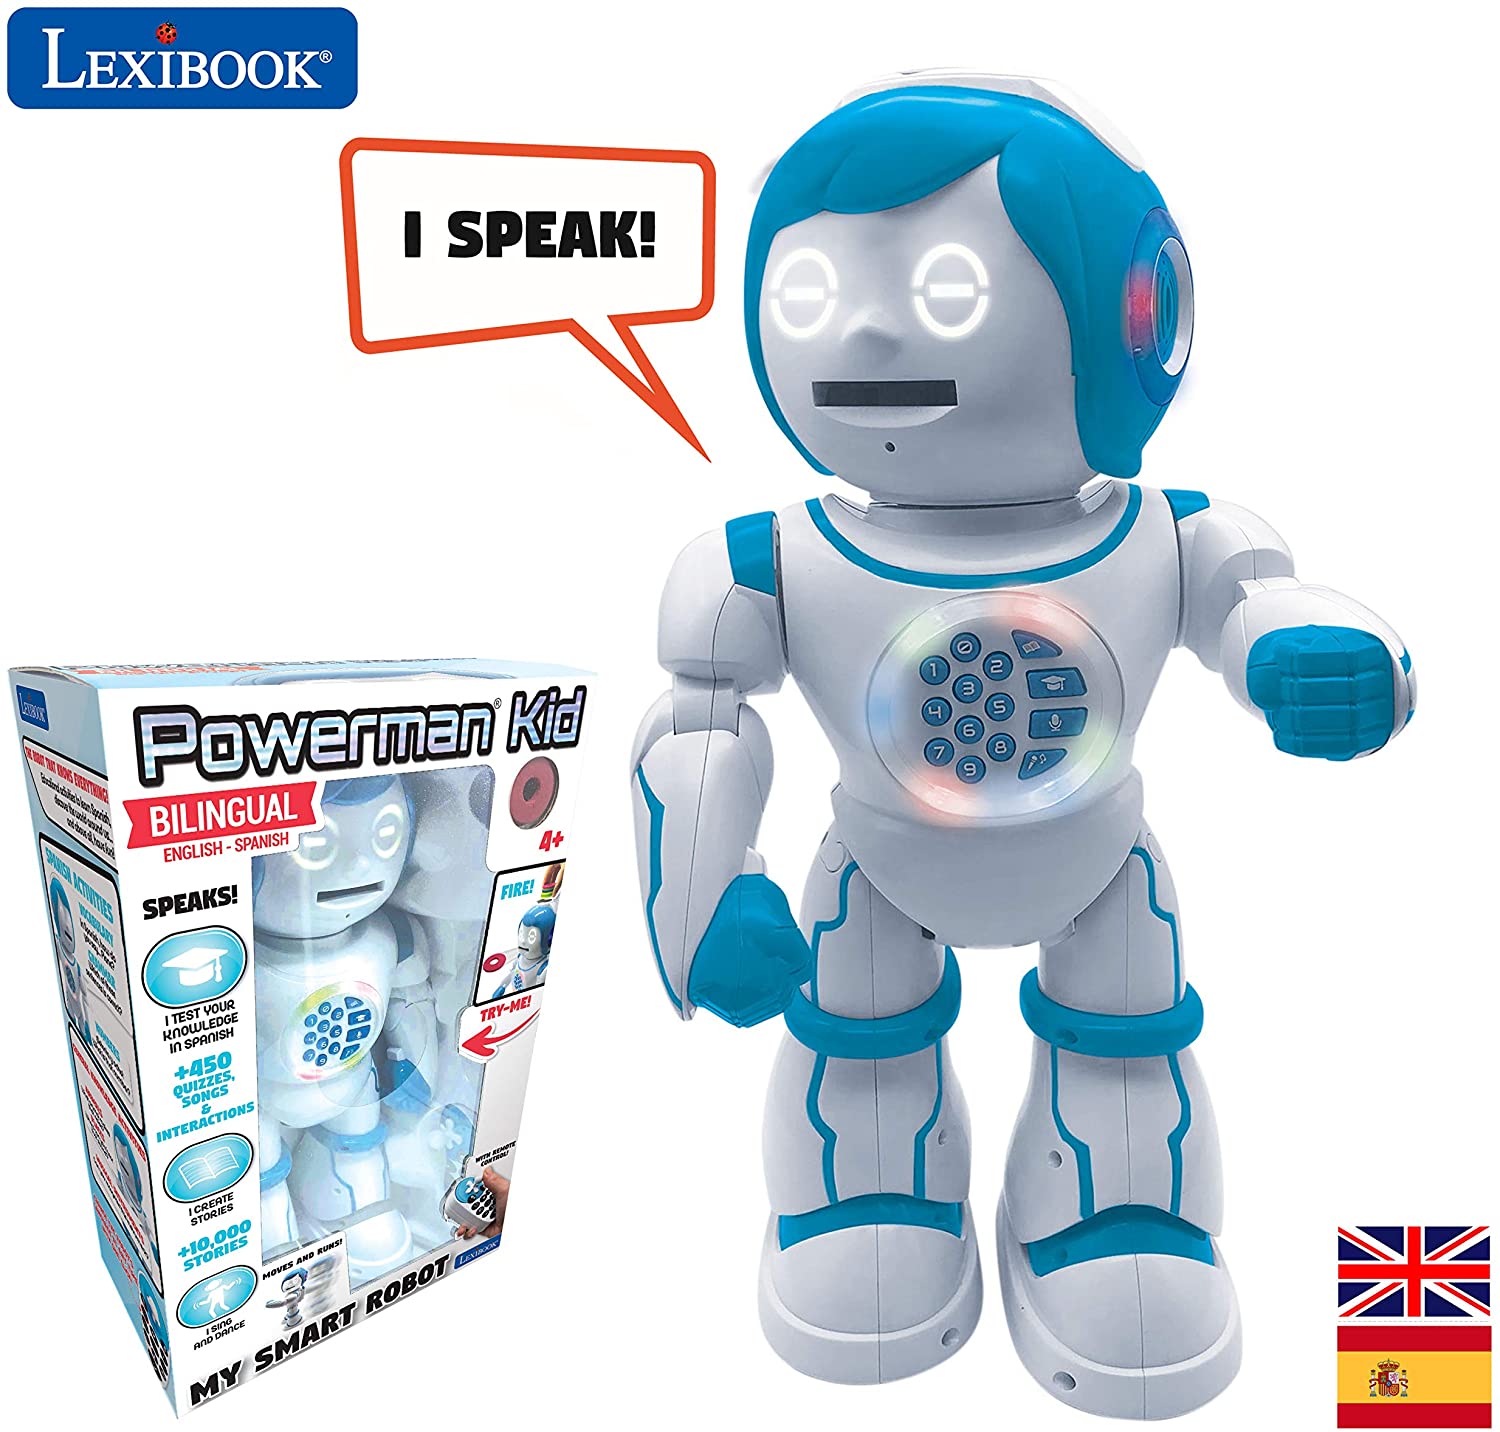 Lexibook Powerman Kid Bilingual (English/ Spanish) STEM Programmable Interactive Learning Toy $12.82 + Free Shipping w/ Prime or on $25+